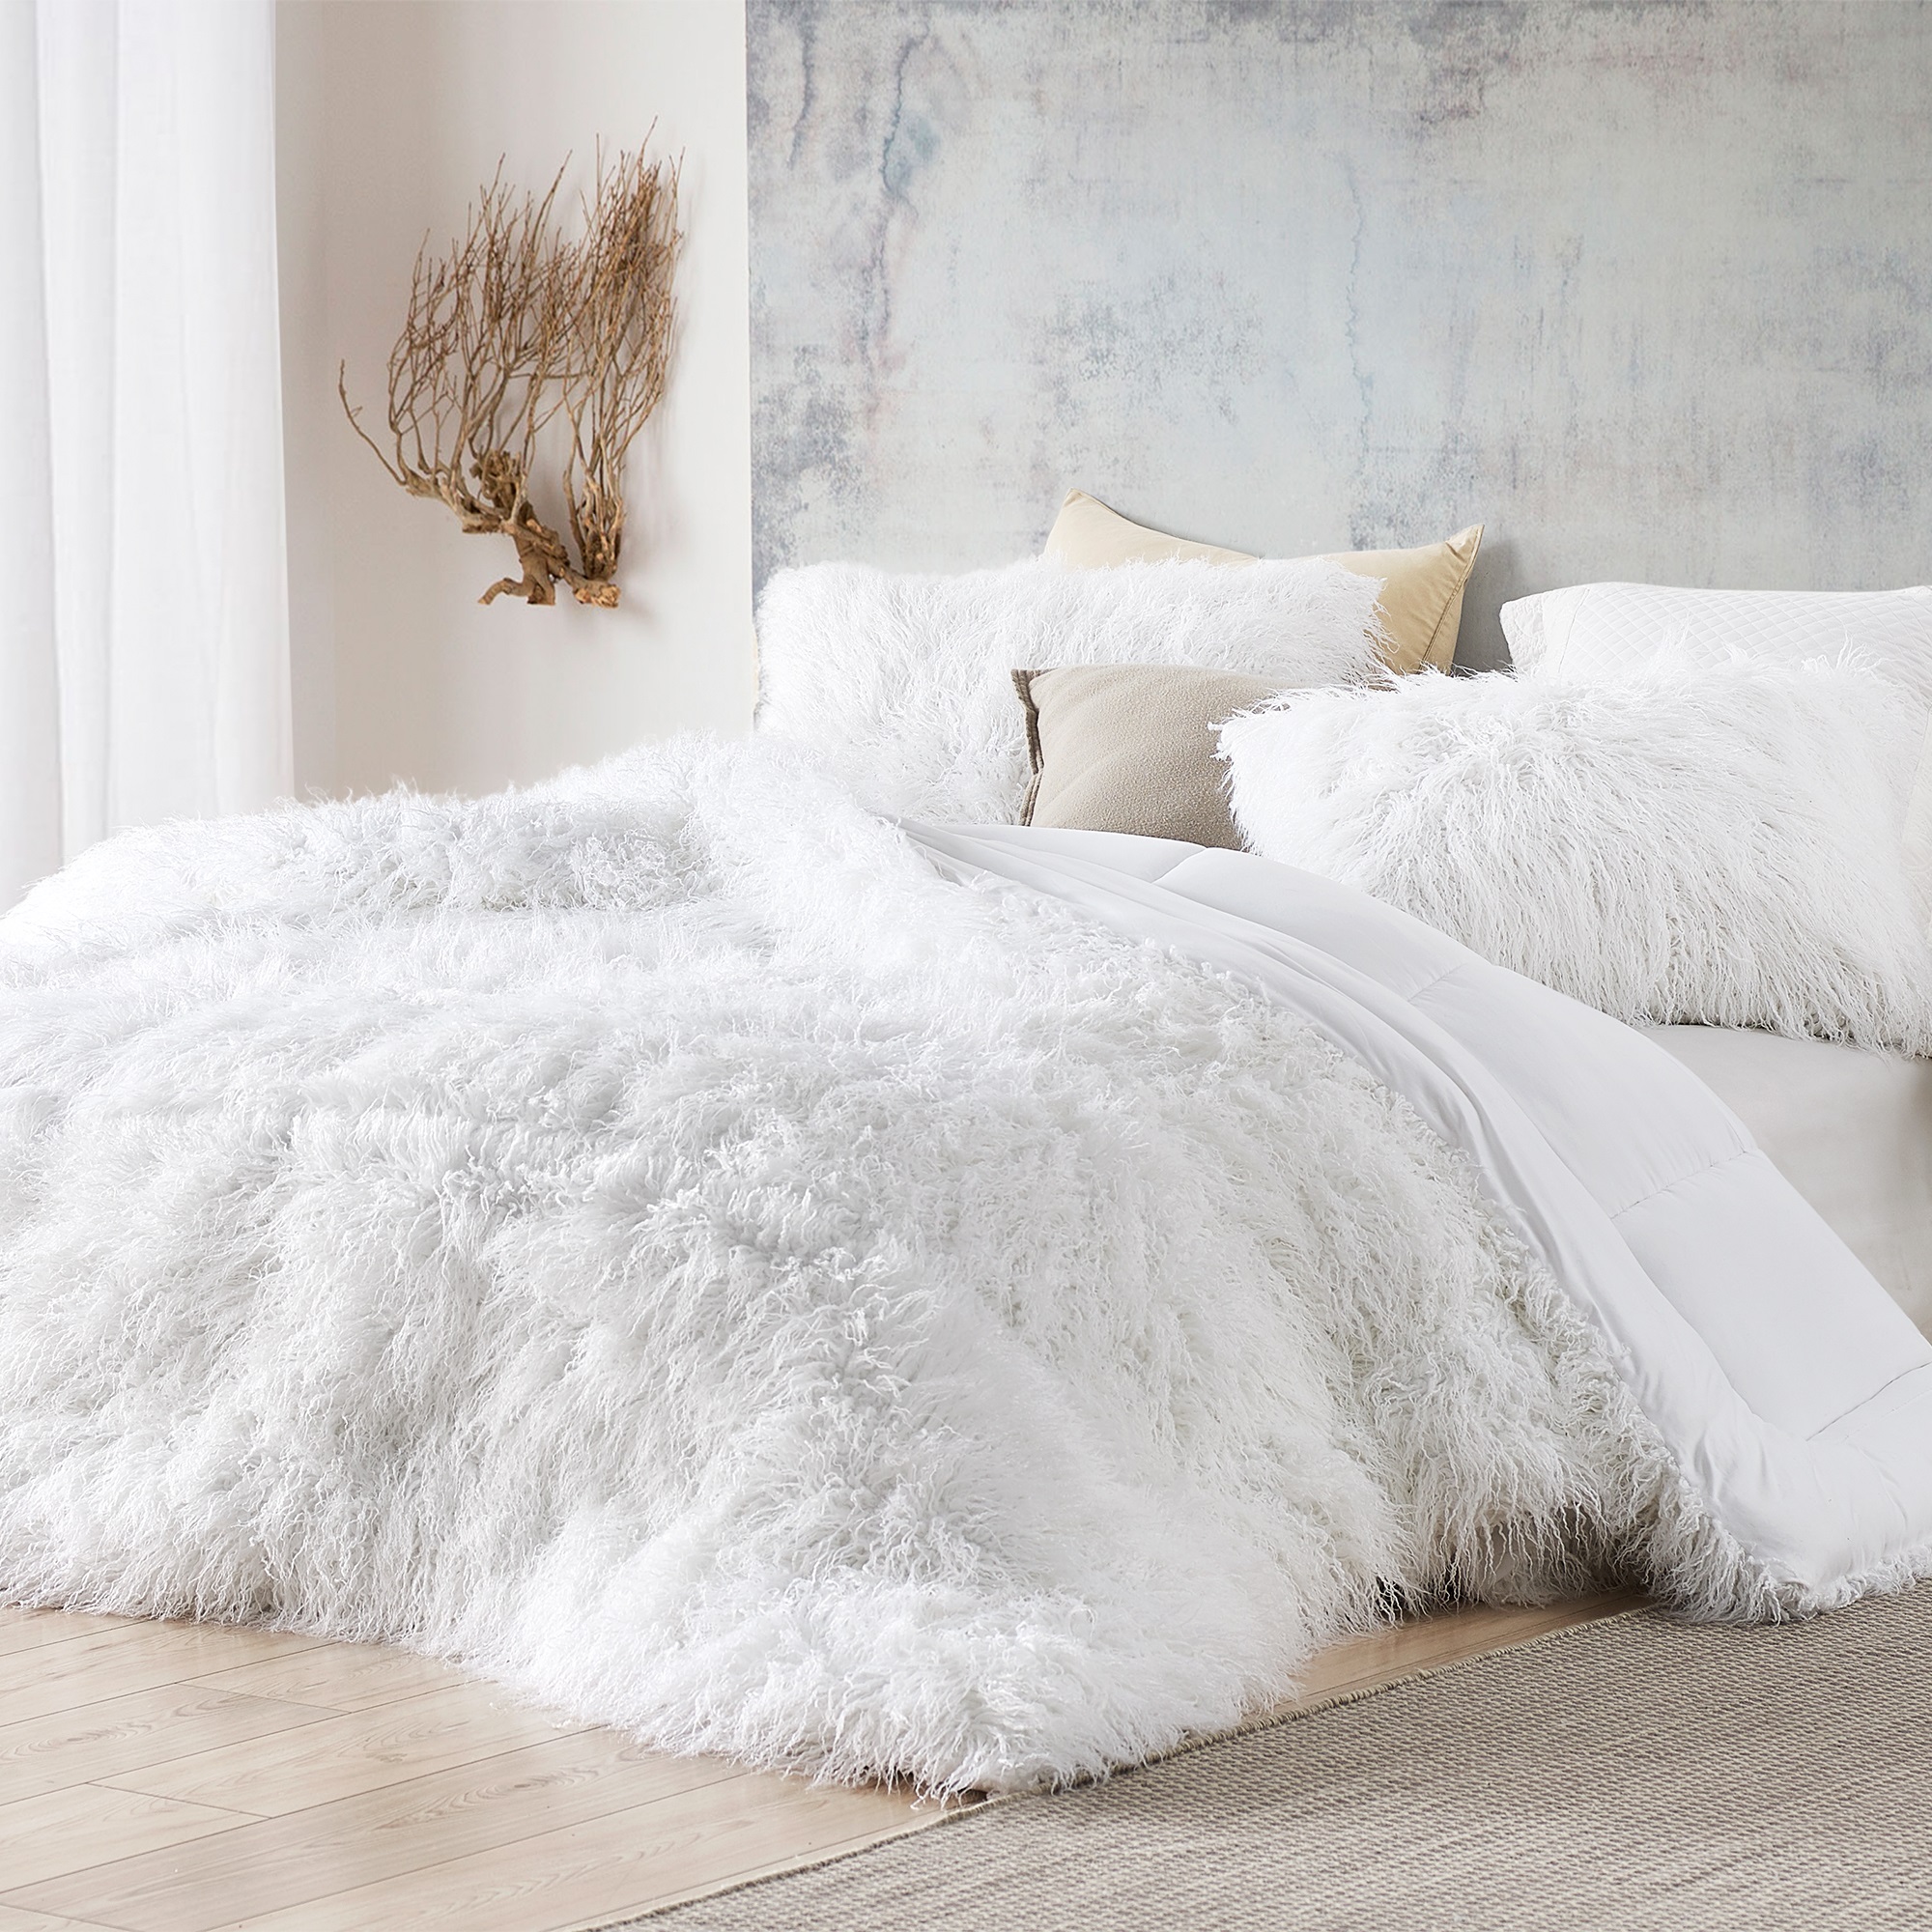 The Bare Himalayan Yeti - Coma Inducer Oversized Comforter - Pure White